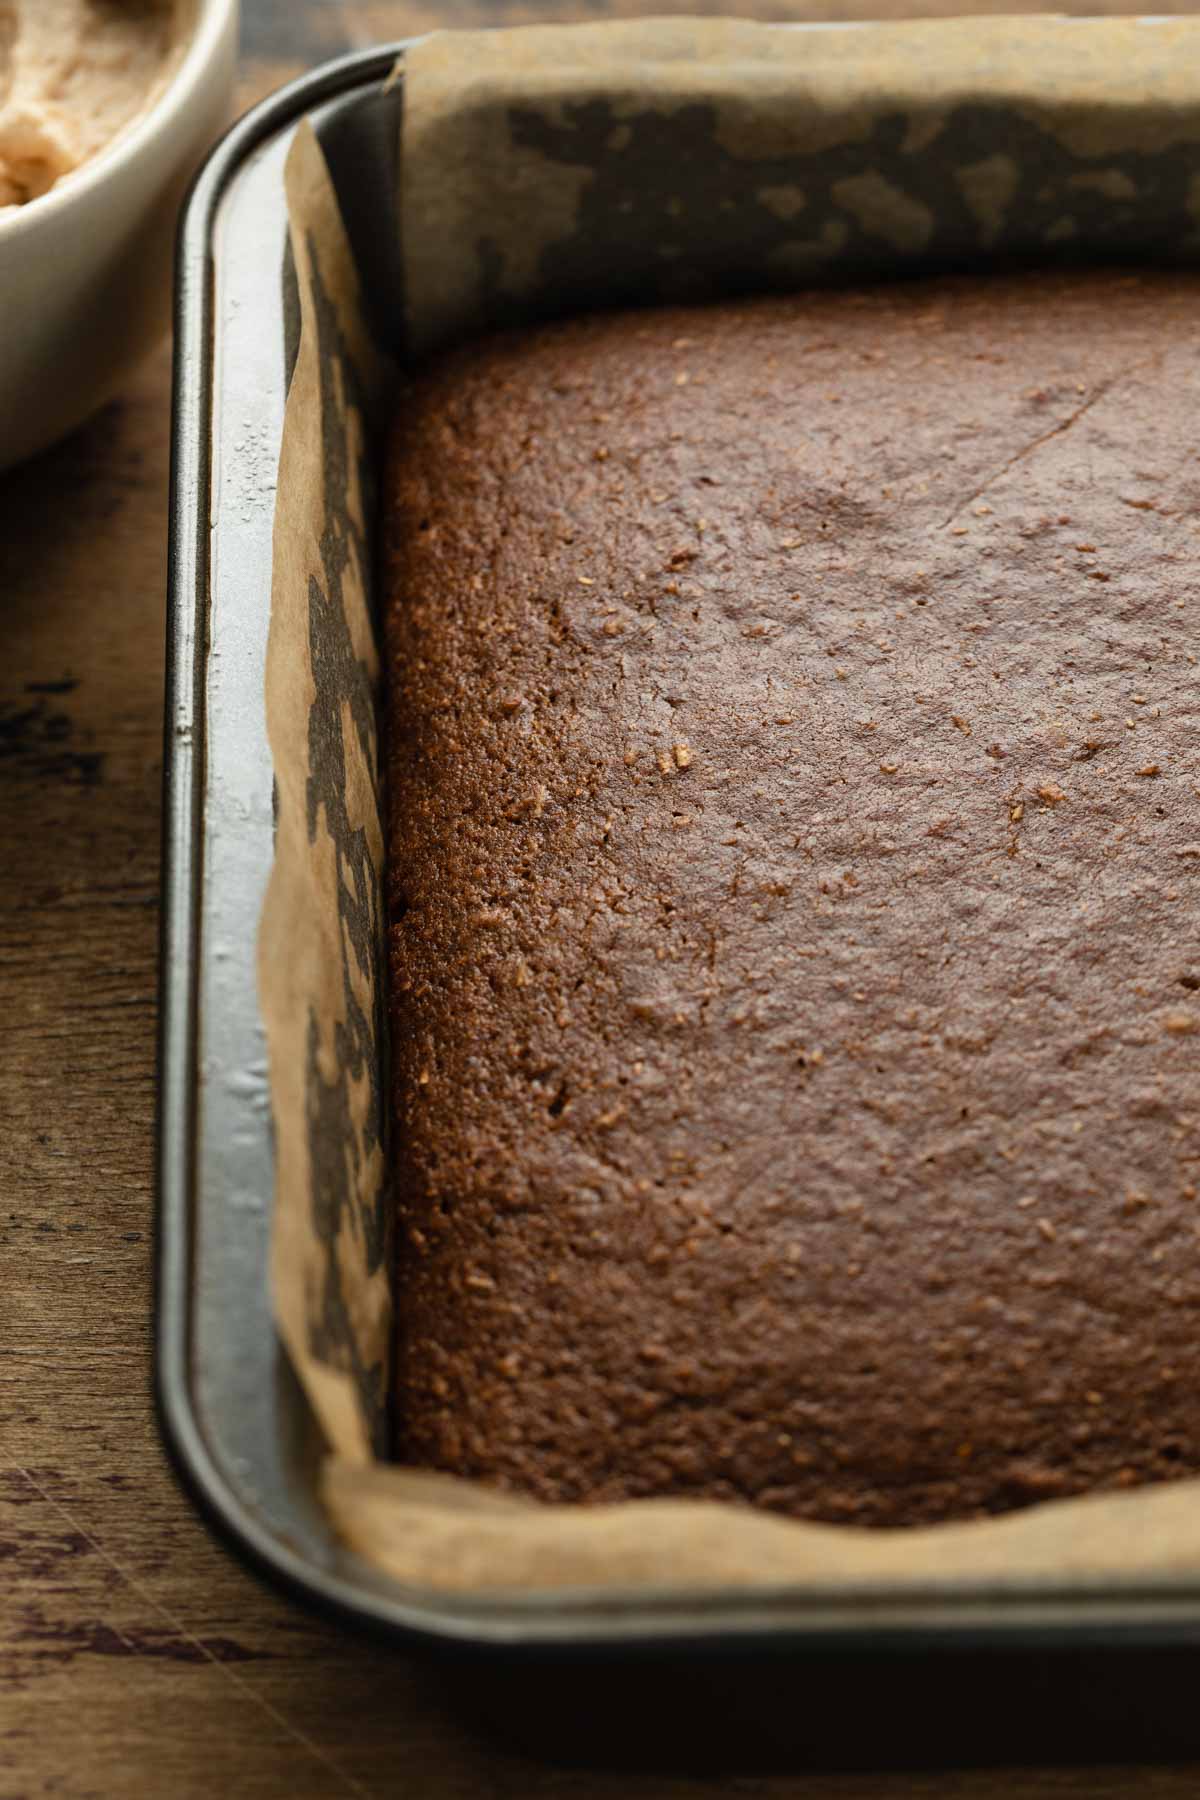 Baked cake cooling in the pan.